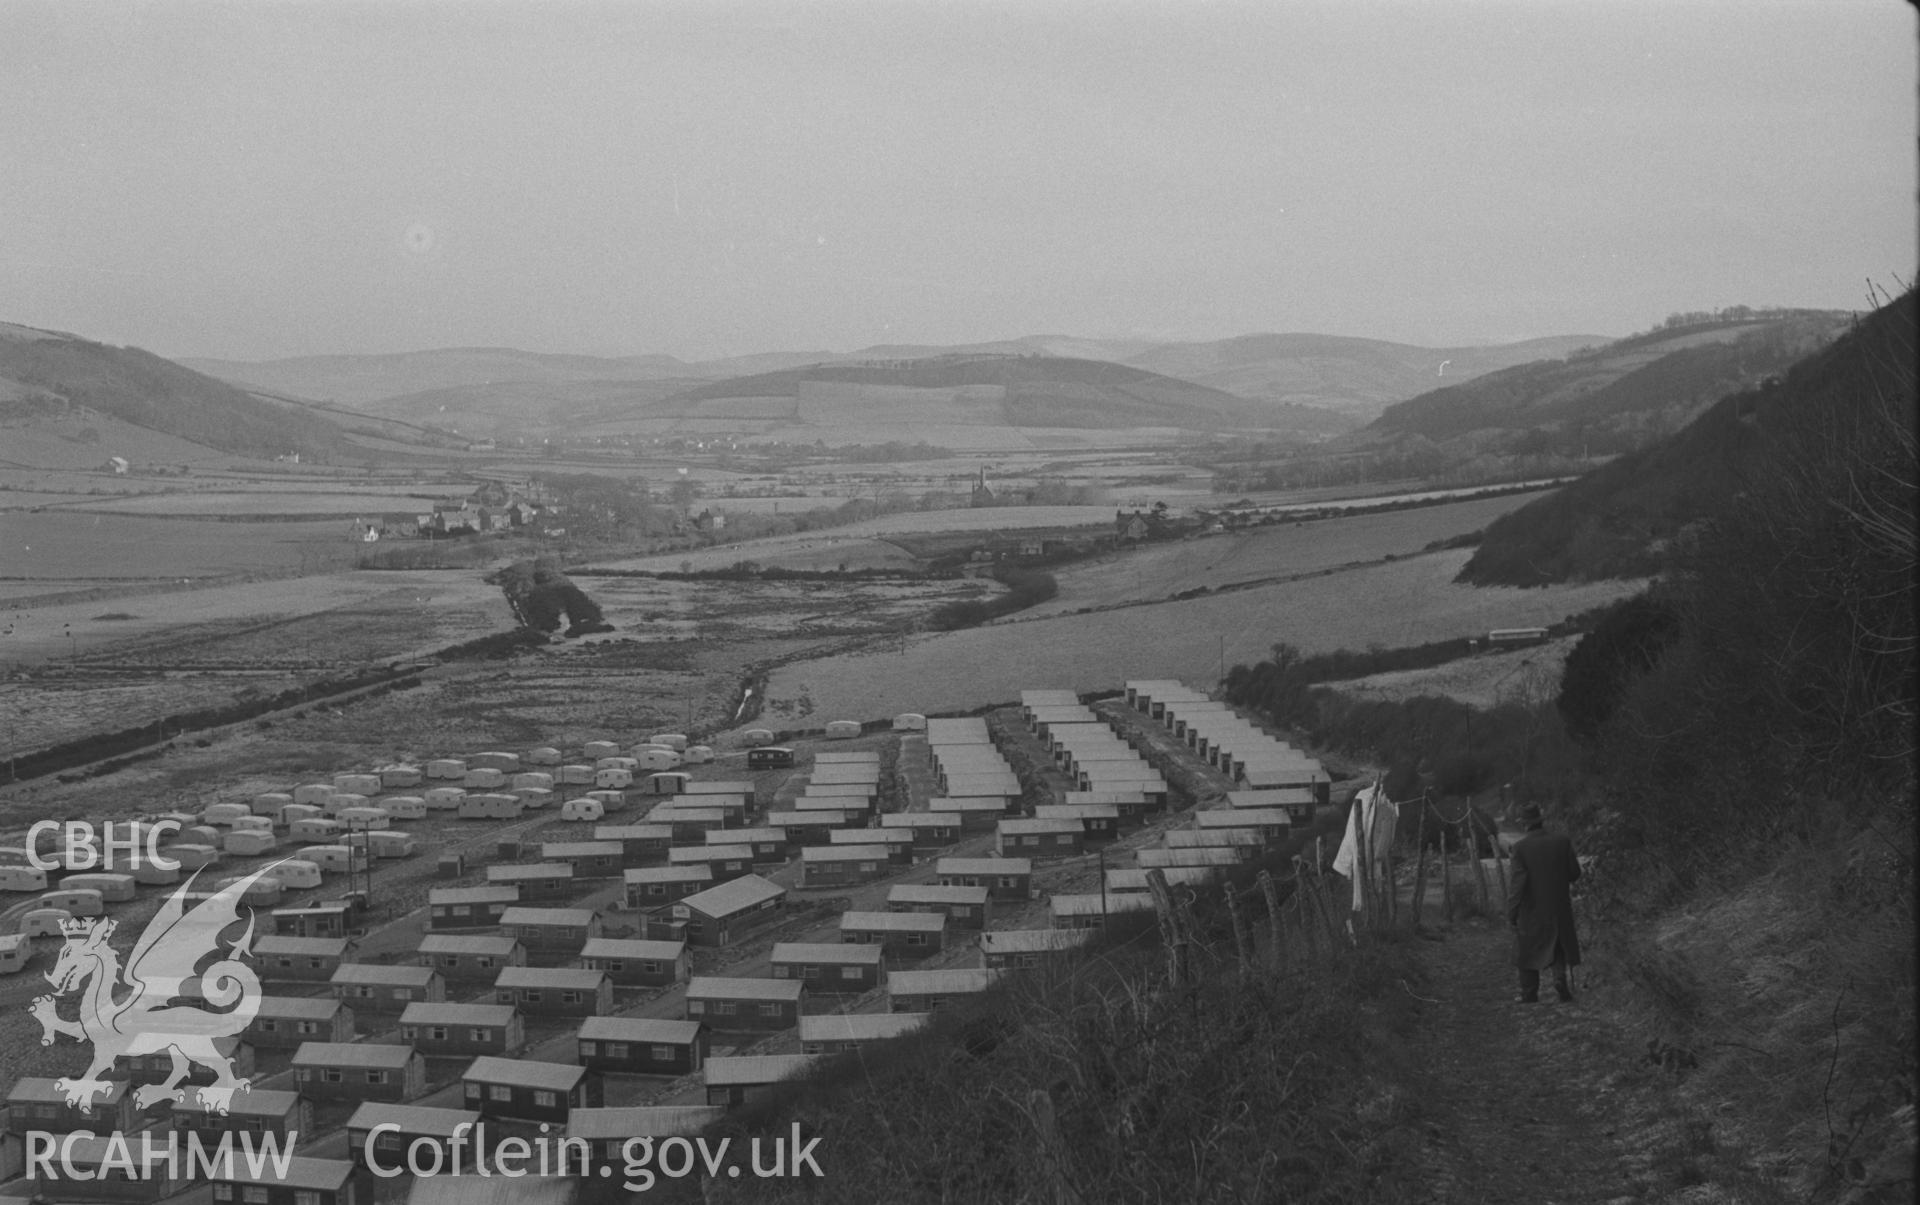 Black and White photograph showing view of caravans and chalets at Glan-y-Mor-Fach, with Llangorwen beyond. Photographed by Arthur Chater in December 1962 from Grid Reference SN 584 829, looking east north east.